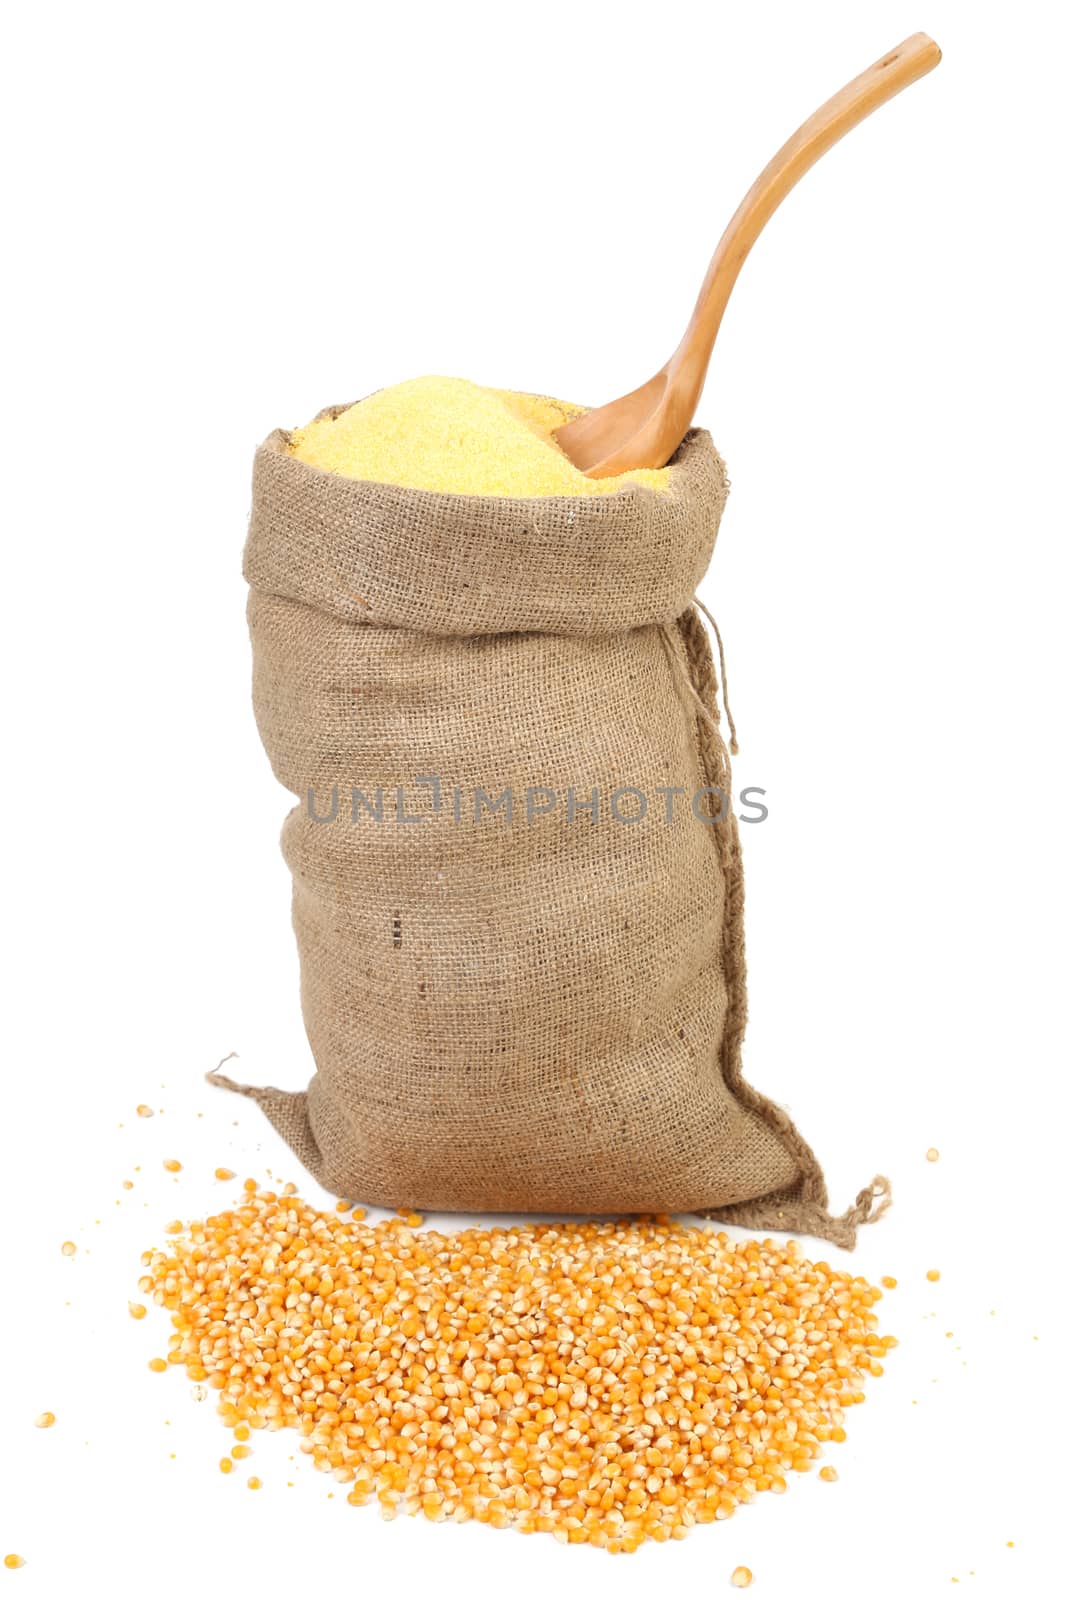 Sack with corn grains and flour. by indigolotos